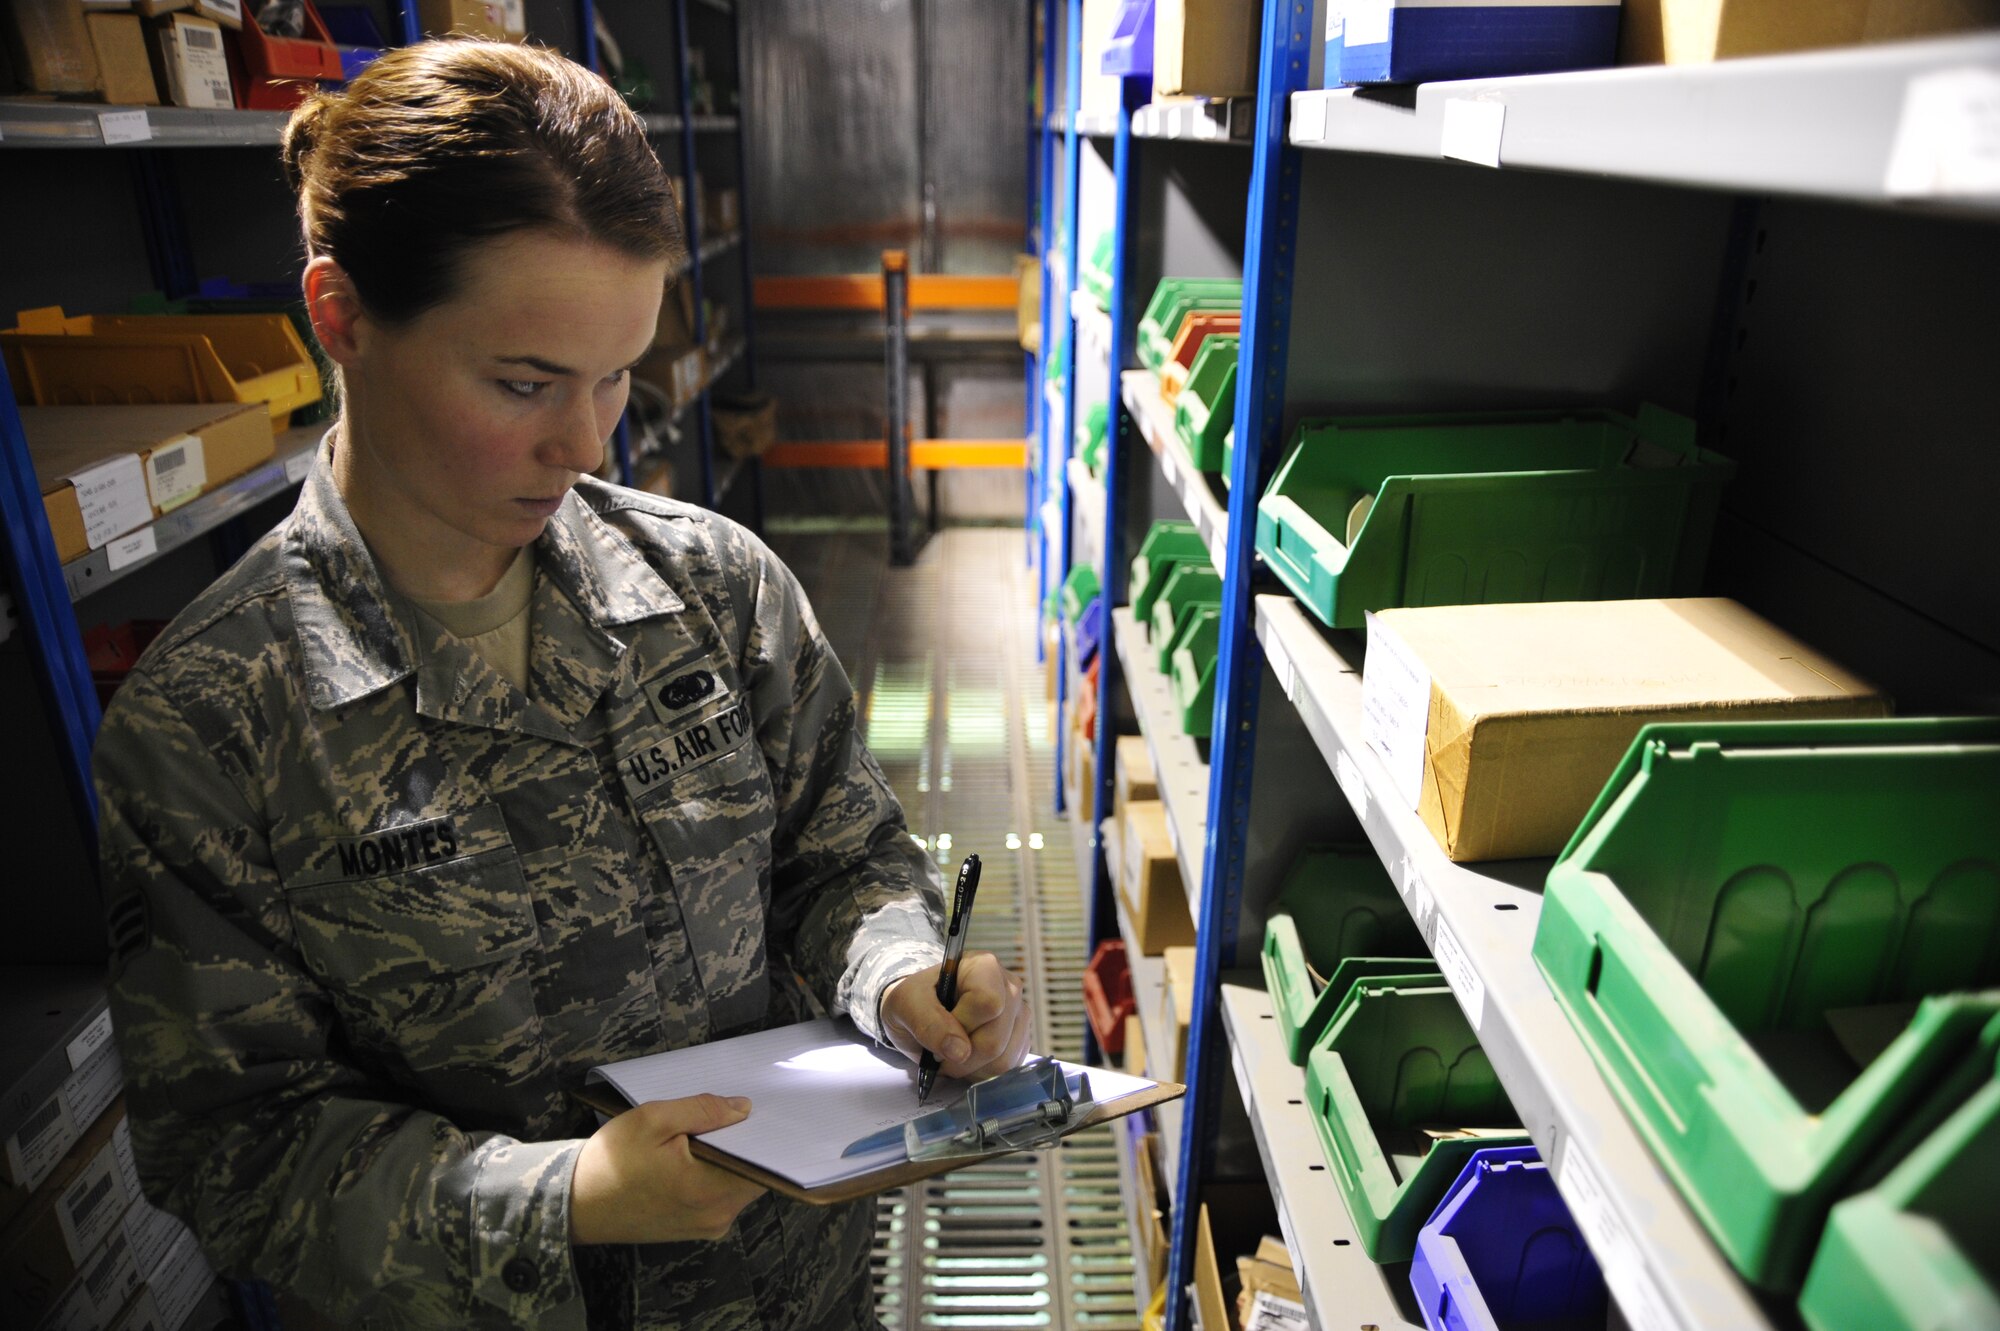 SOUTHWEST ASIA -Senior Airman Megan Montes, 380th Expeditionary Logistics Readiness Squadron, writes down national stock numbers and quantity of parts in stock Sept. 4, 2009. Airman Montes is deployed from MacDill Air Force Base, Fla., and grew up in Las Vegas, Nev. (U.S. Air Force photo/Tech. Sgt. Charles Larkin Sr)